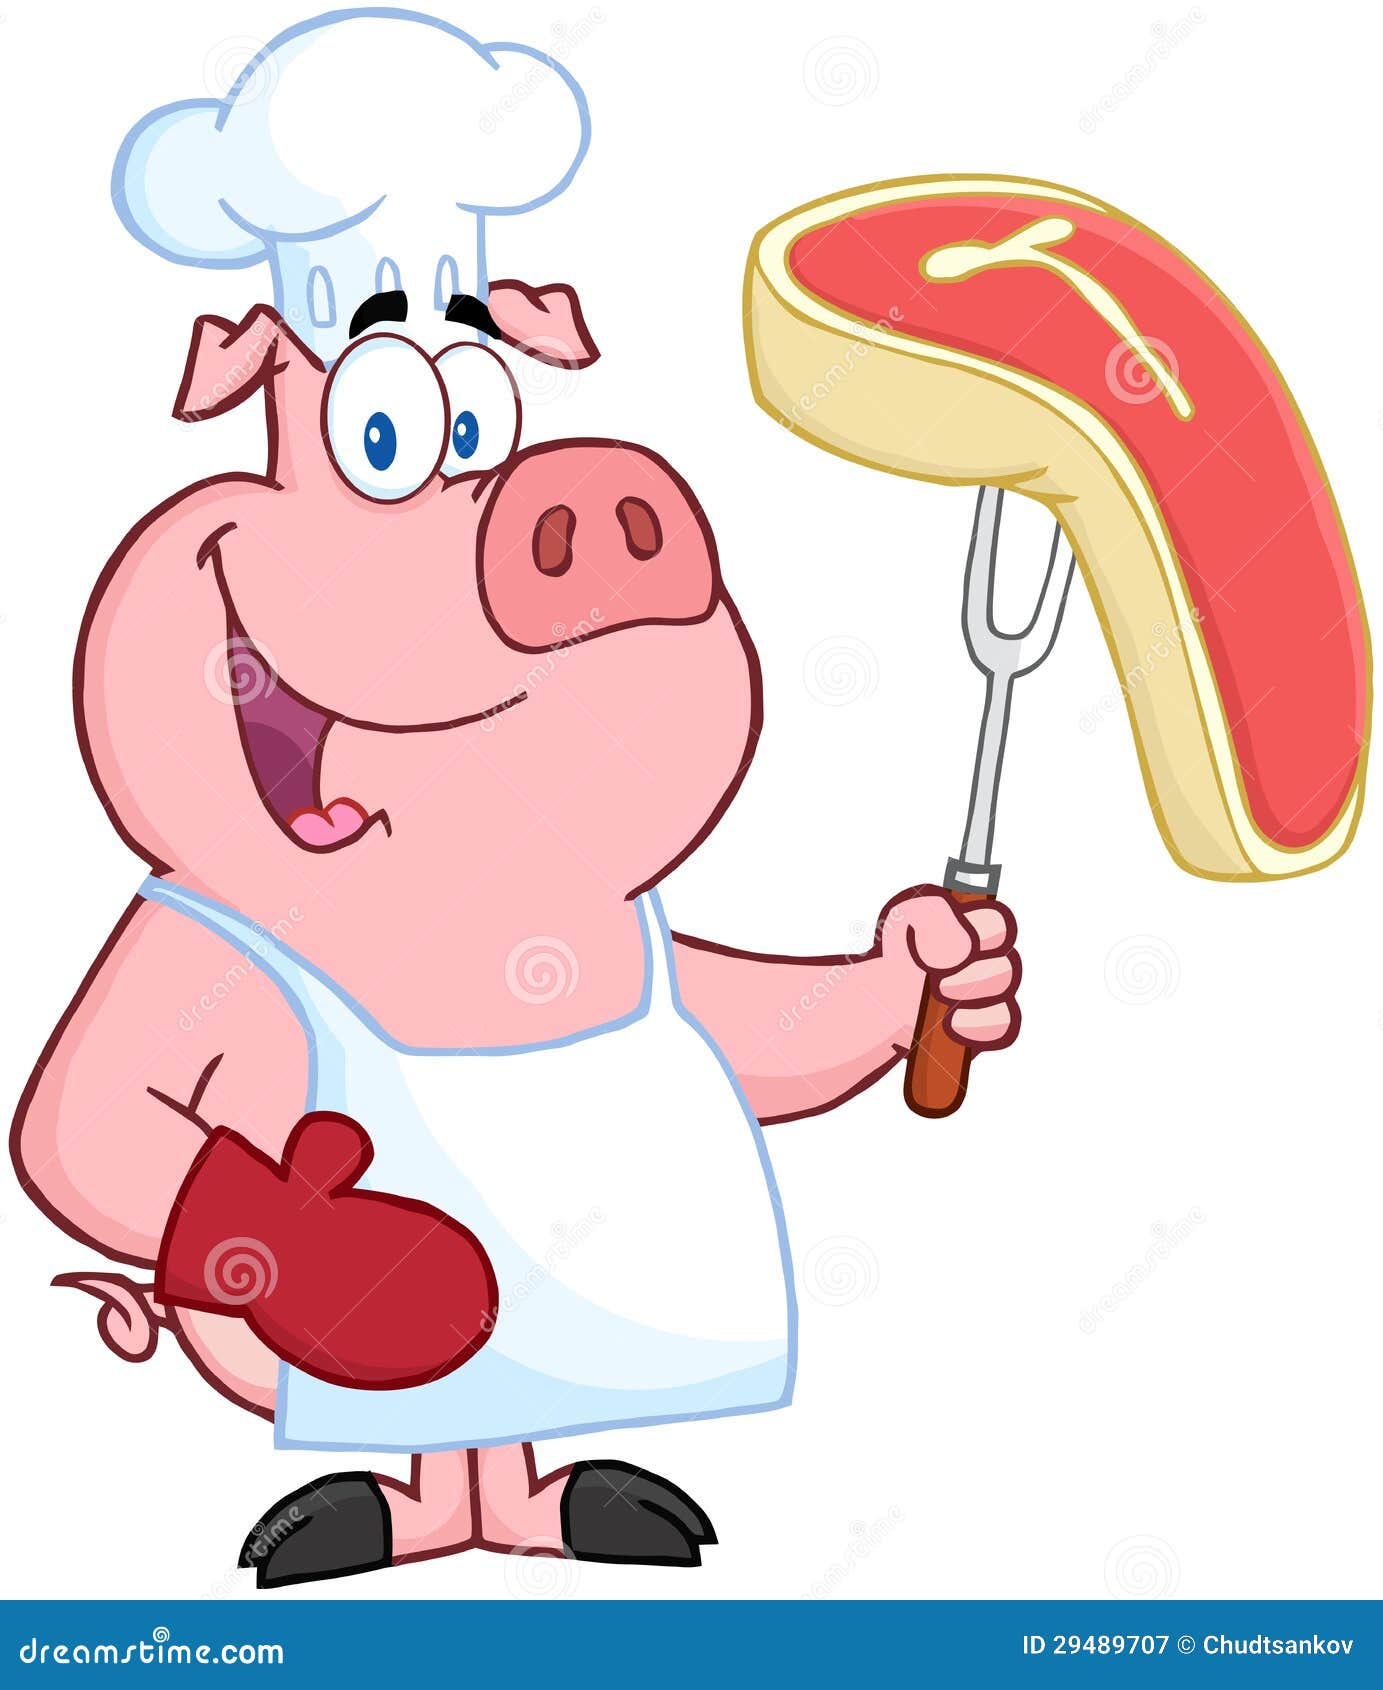 meat raffle clipart - photo #29